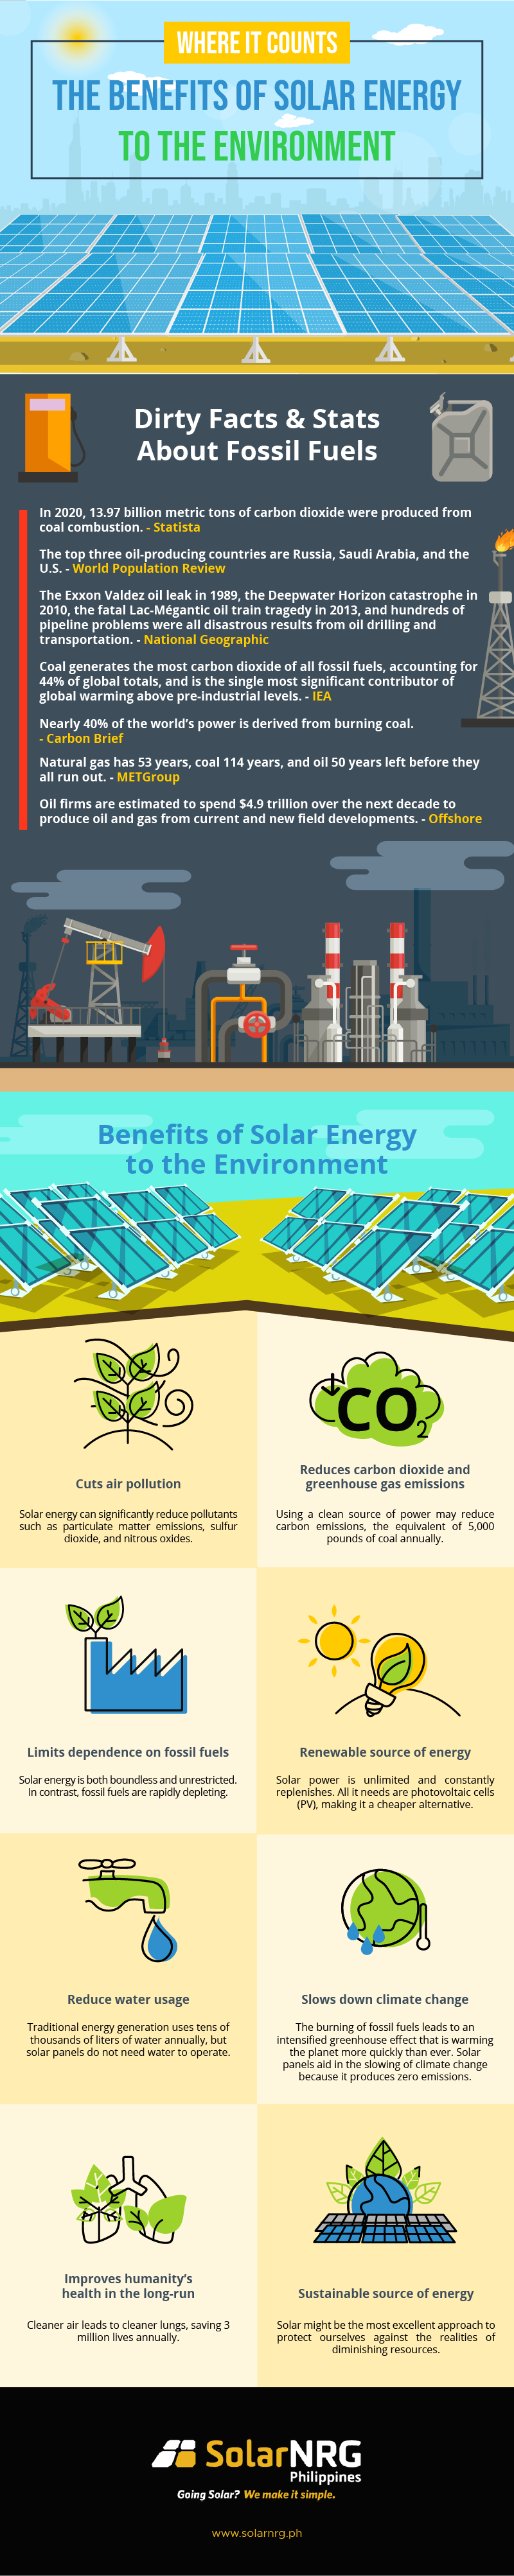 Infographic image of the benefits of solar energy to the environment